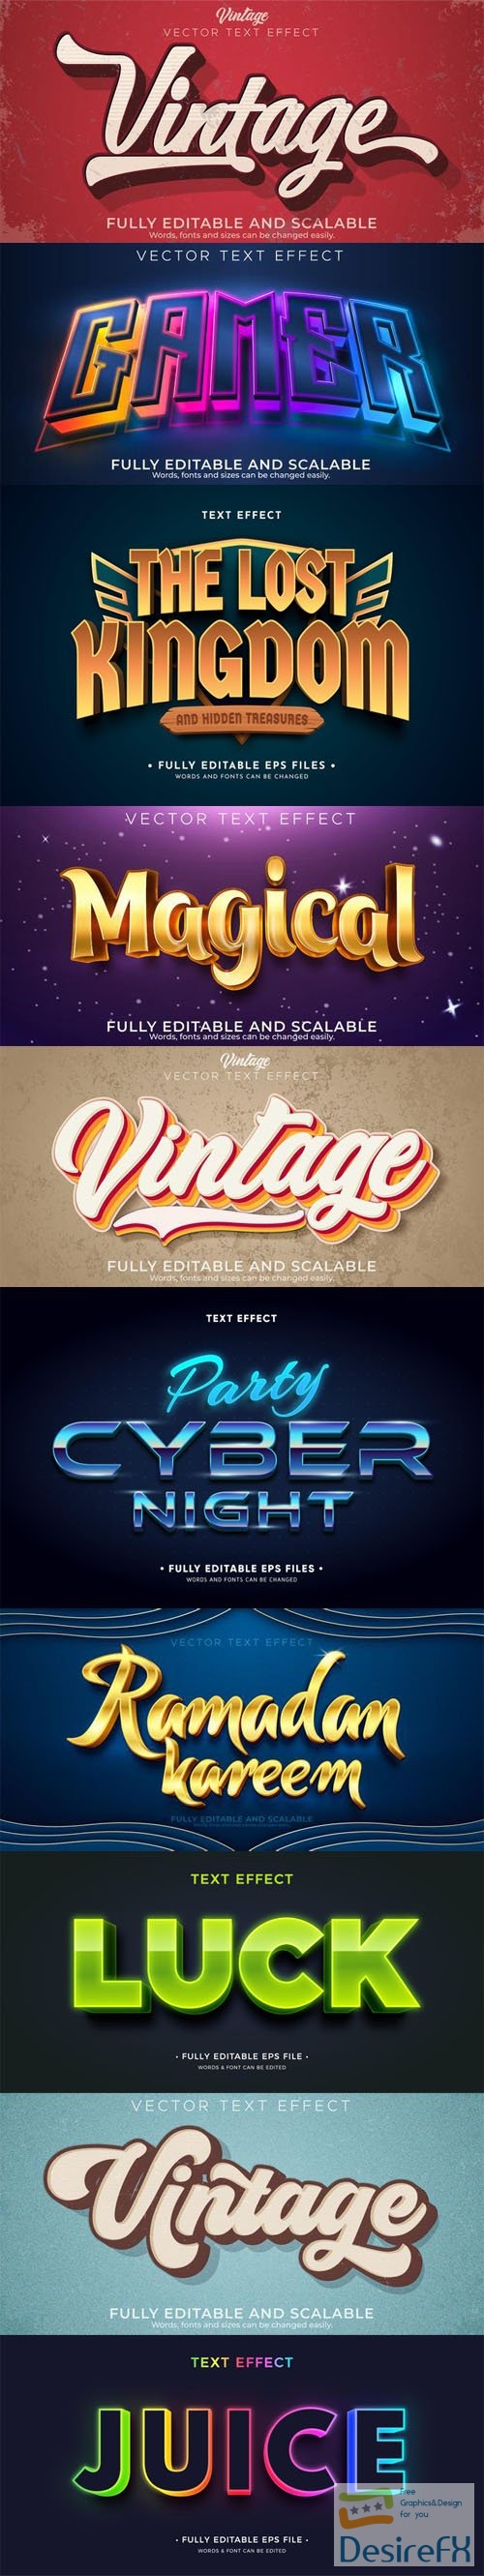 10 Creative Text Effects Vector Collection